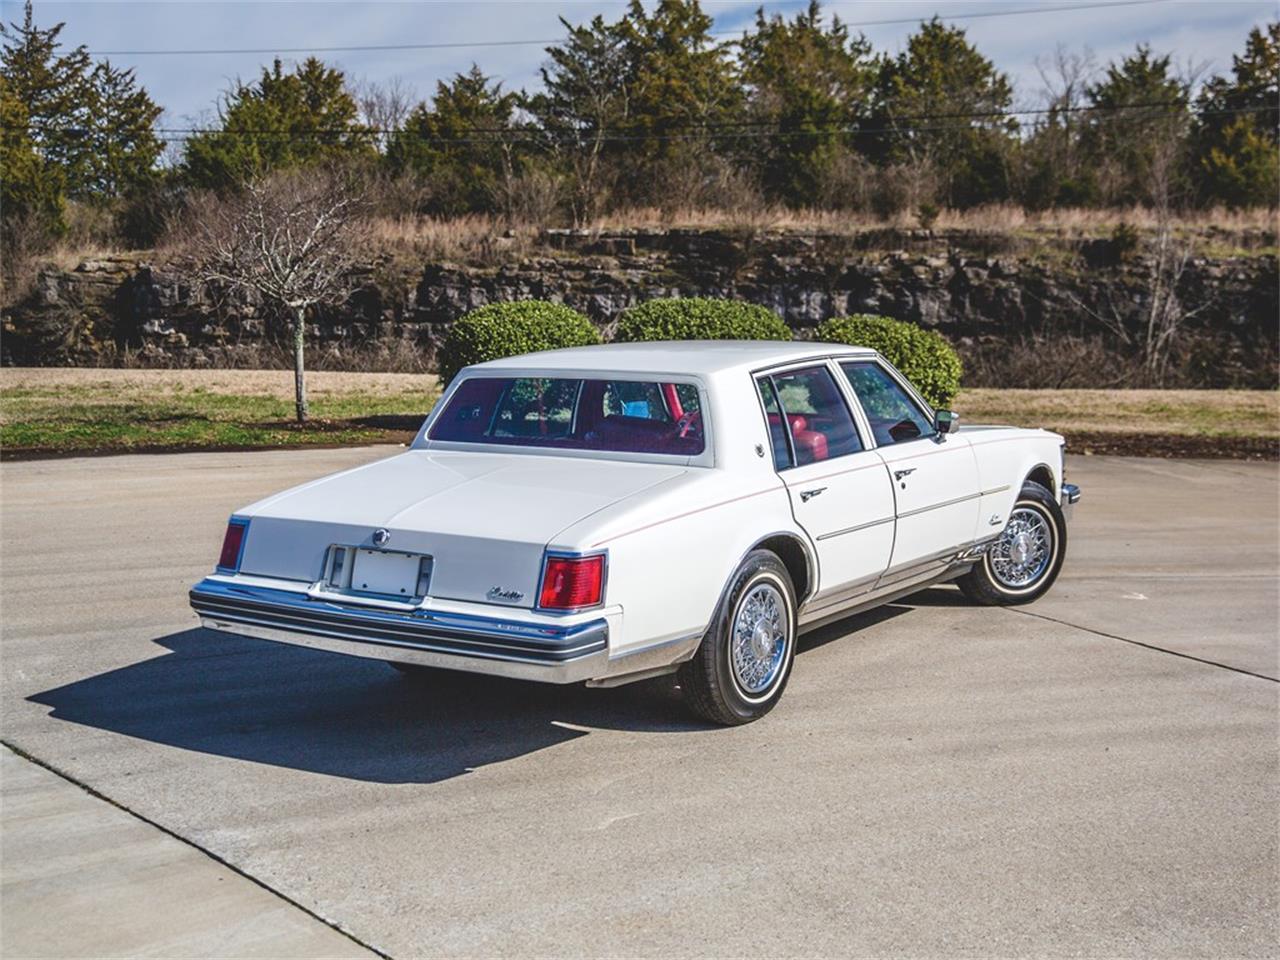 For Sale at Auction: 1977 Cadillac Seville for sale in Fort Lauderdale, FL